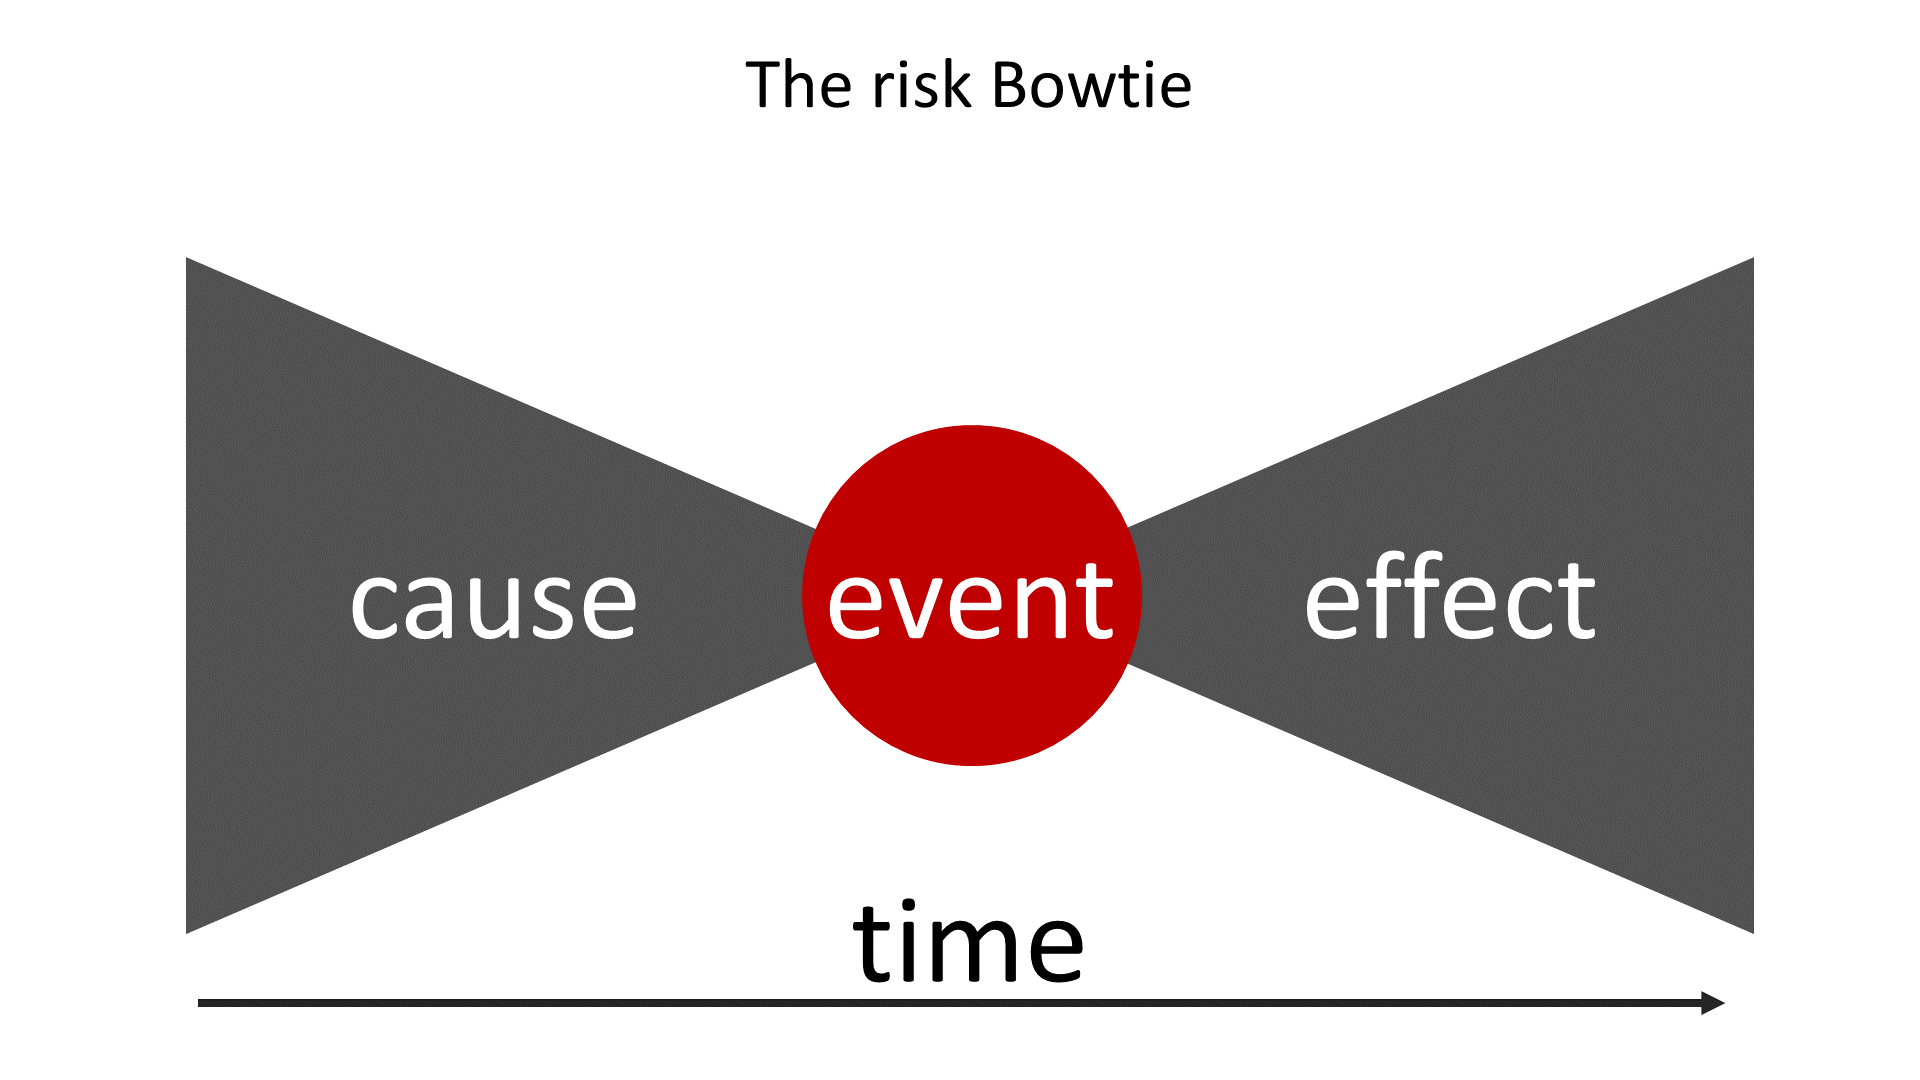 Risk bowtie diagram showing the three components of risk - cause, event and effect.